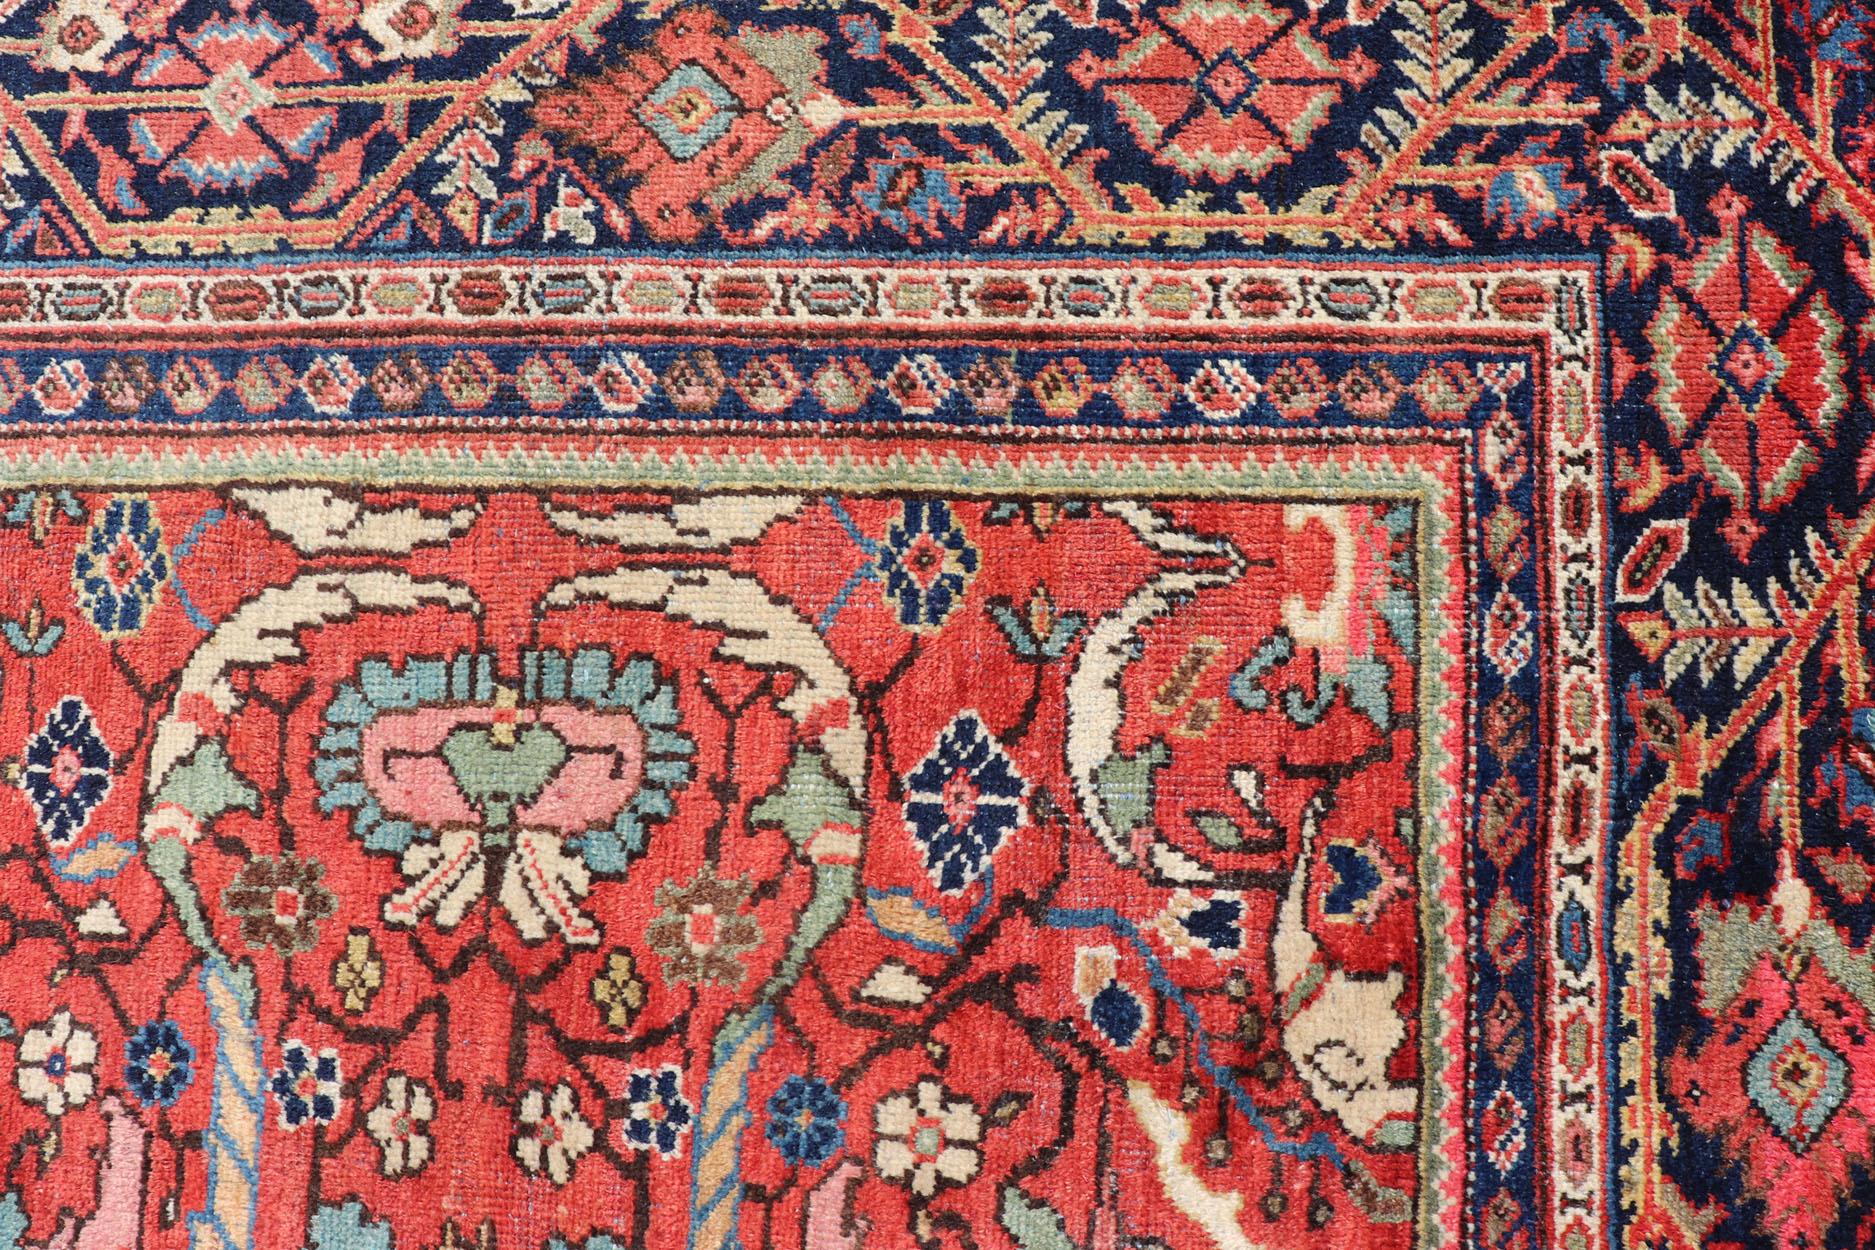 Persian antique Mahal rug with floral  design in soft red, Keivan Woven Arts / rug PTA-200706, country of origin / type: Iran / Sultanabad, circa early-20th century

Measures: 7'8 x 10'10.    

This Antique Persian Mahal/Sultanabad rug features a